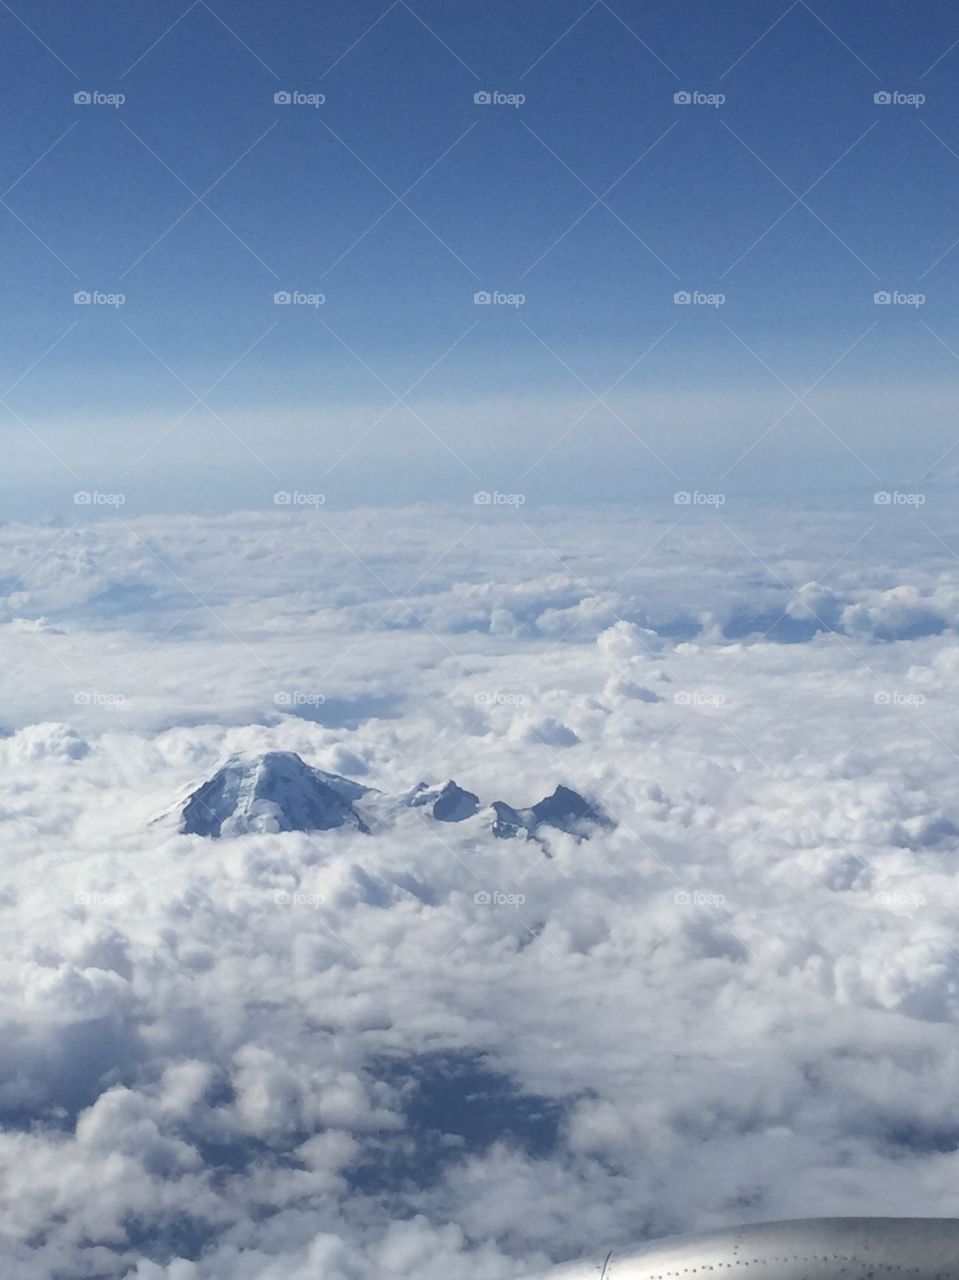 The tops of mountains are visible from a window on board a plane.